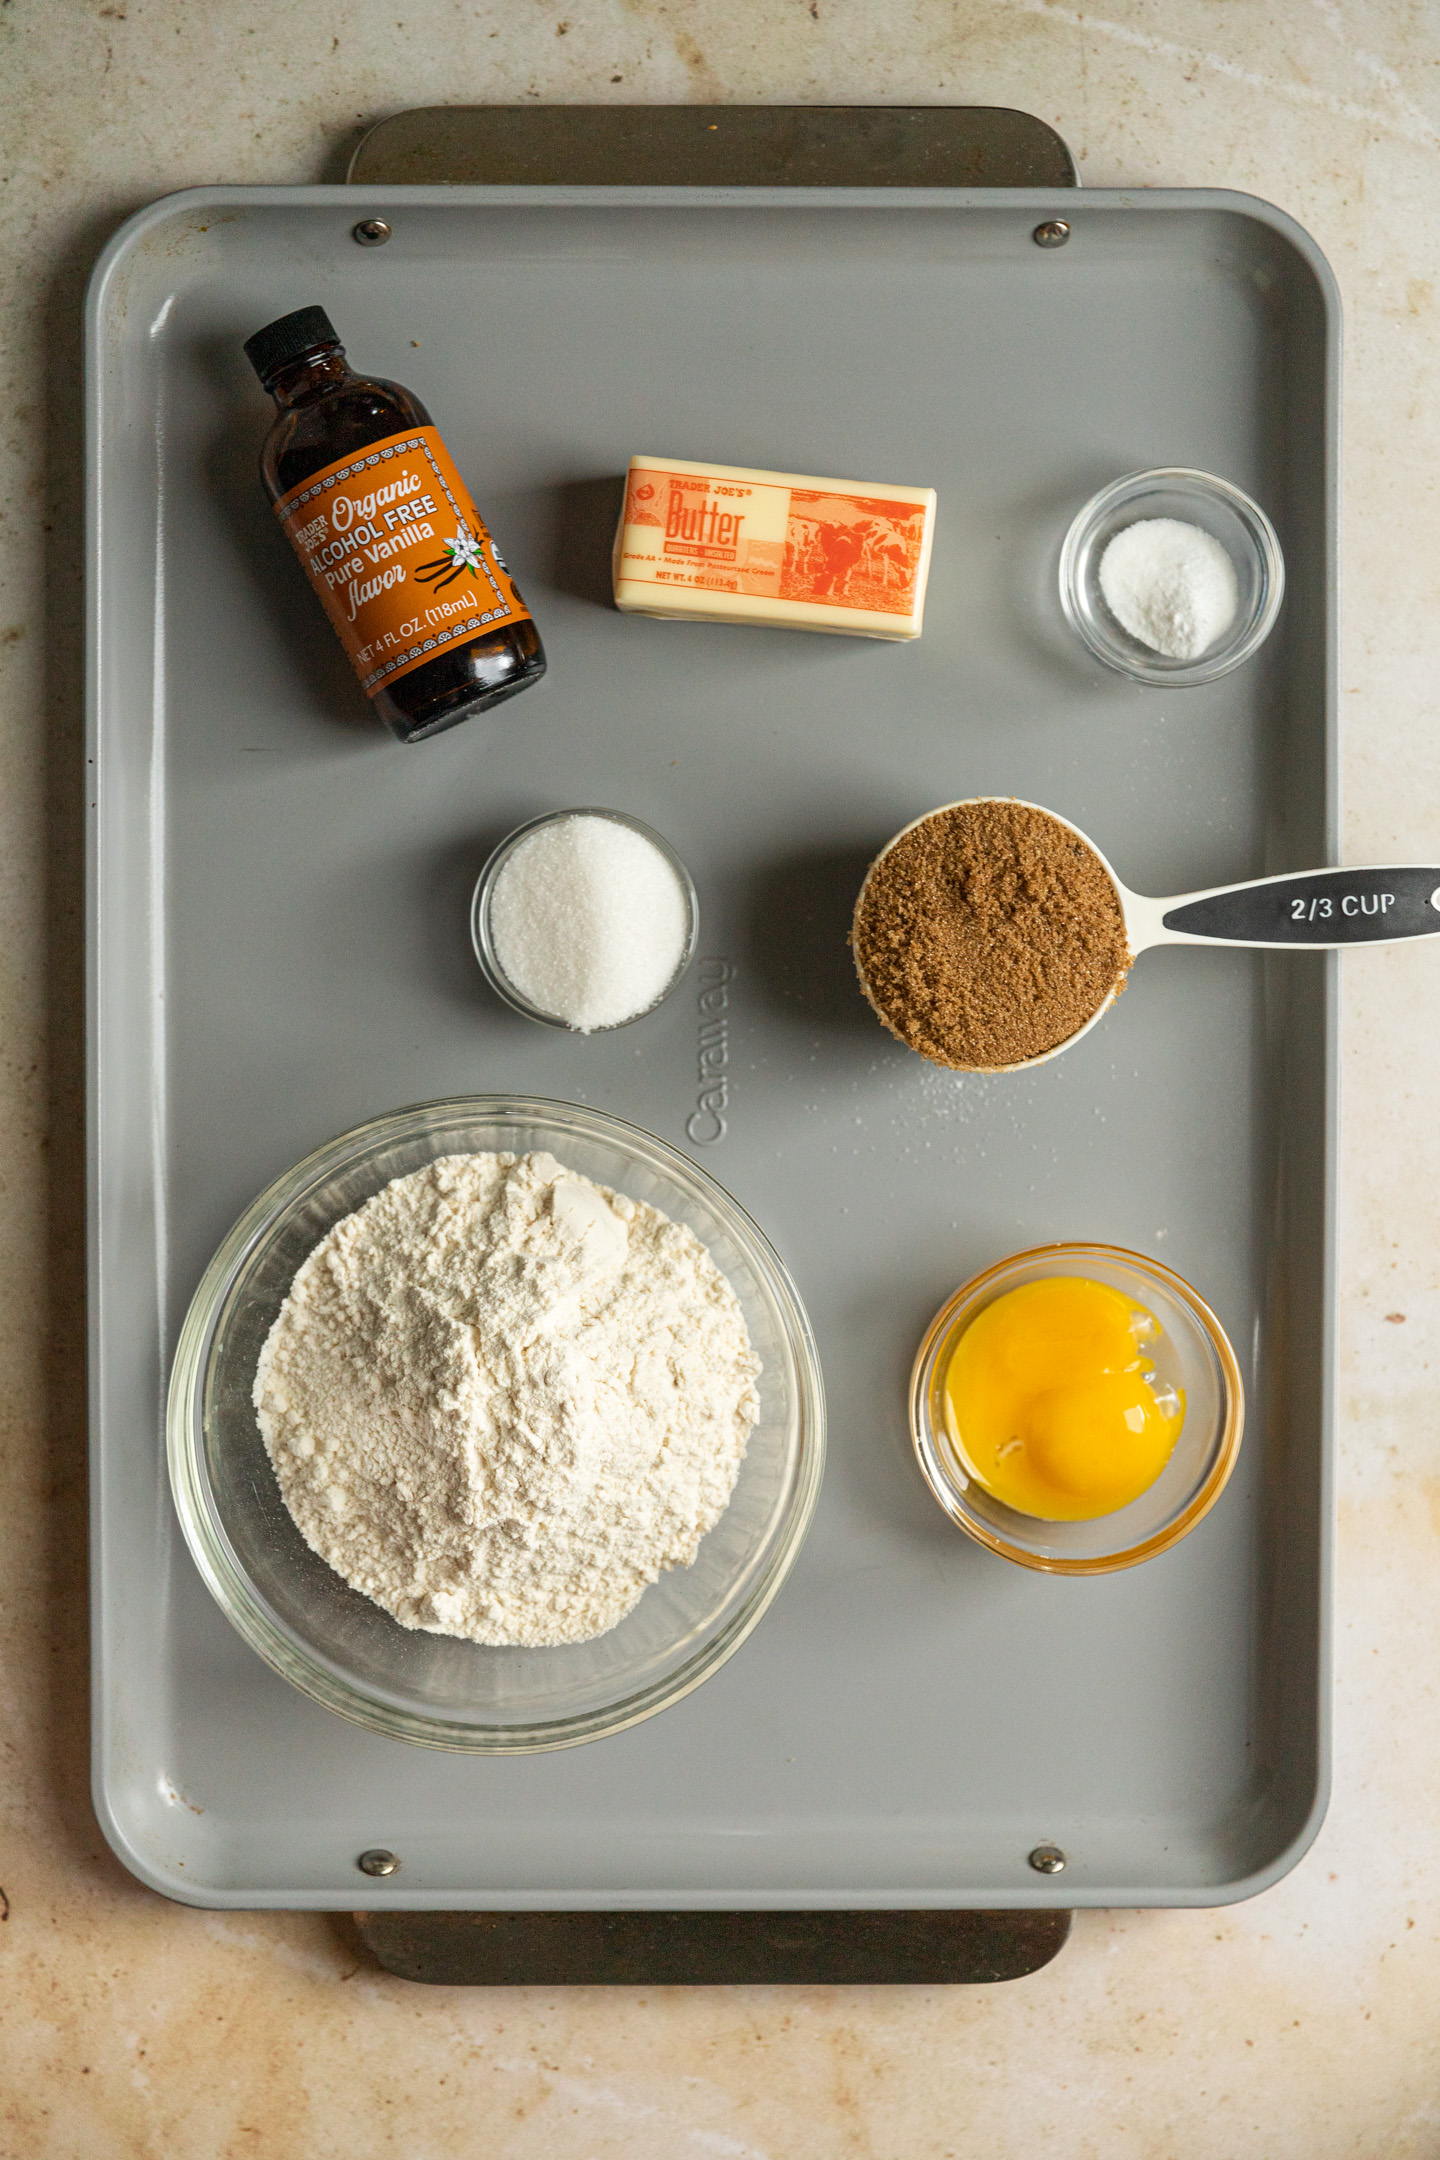 Ingredients for chocolate chipless cookies.